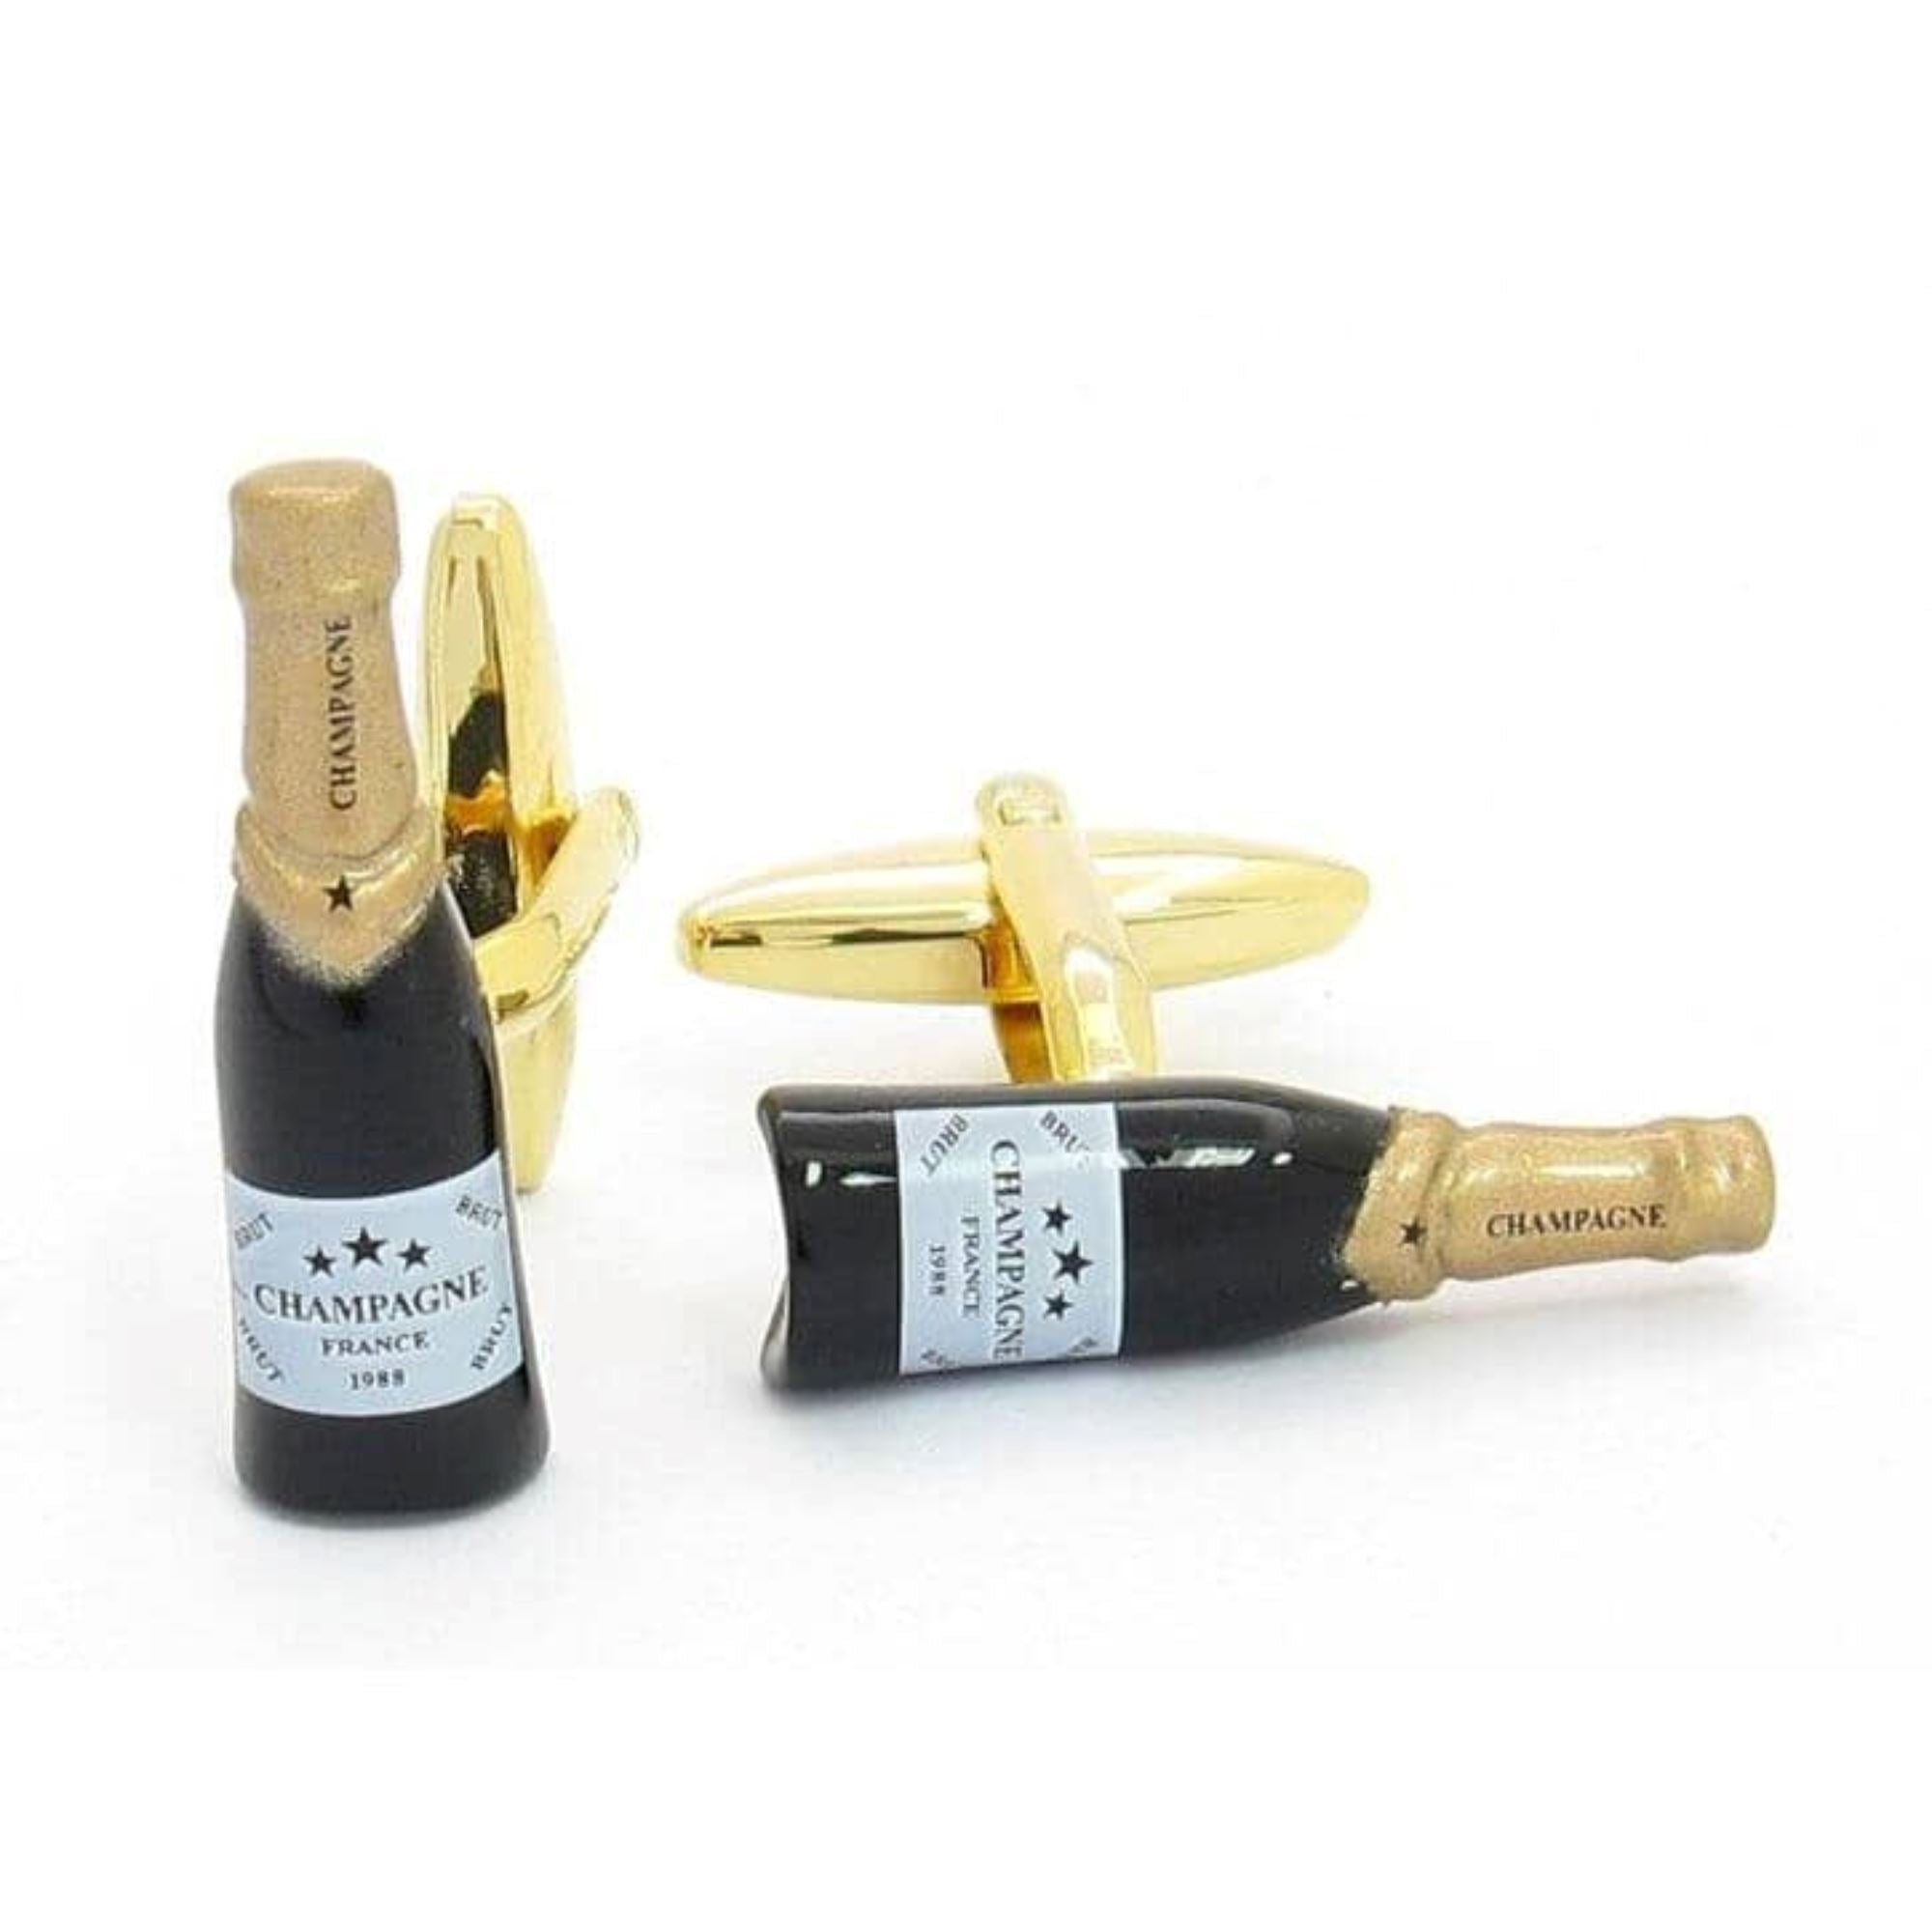 "Cheers" Champagne Gold Cufflinks Novelty Cufflinks Clinks Australia "Cheers" Champagne Gold Cufflinks 